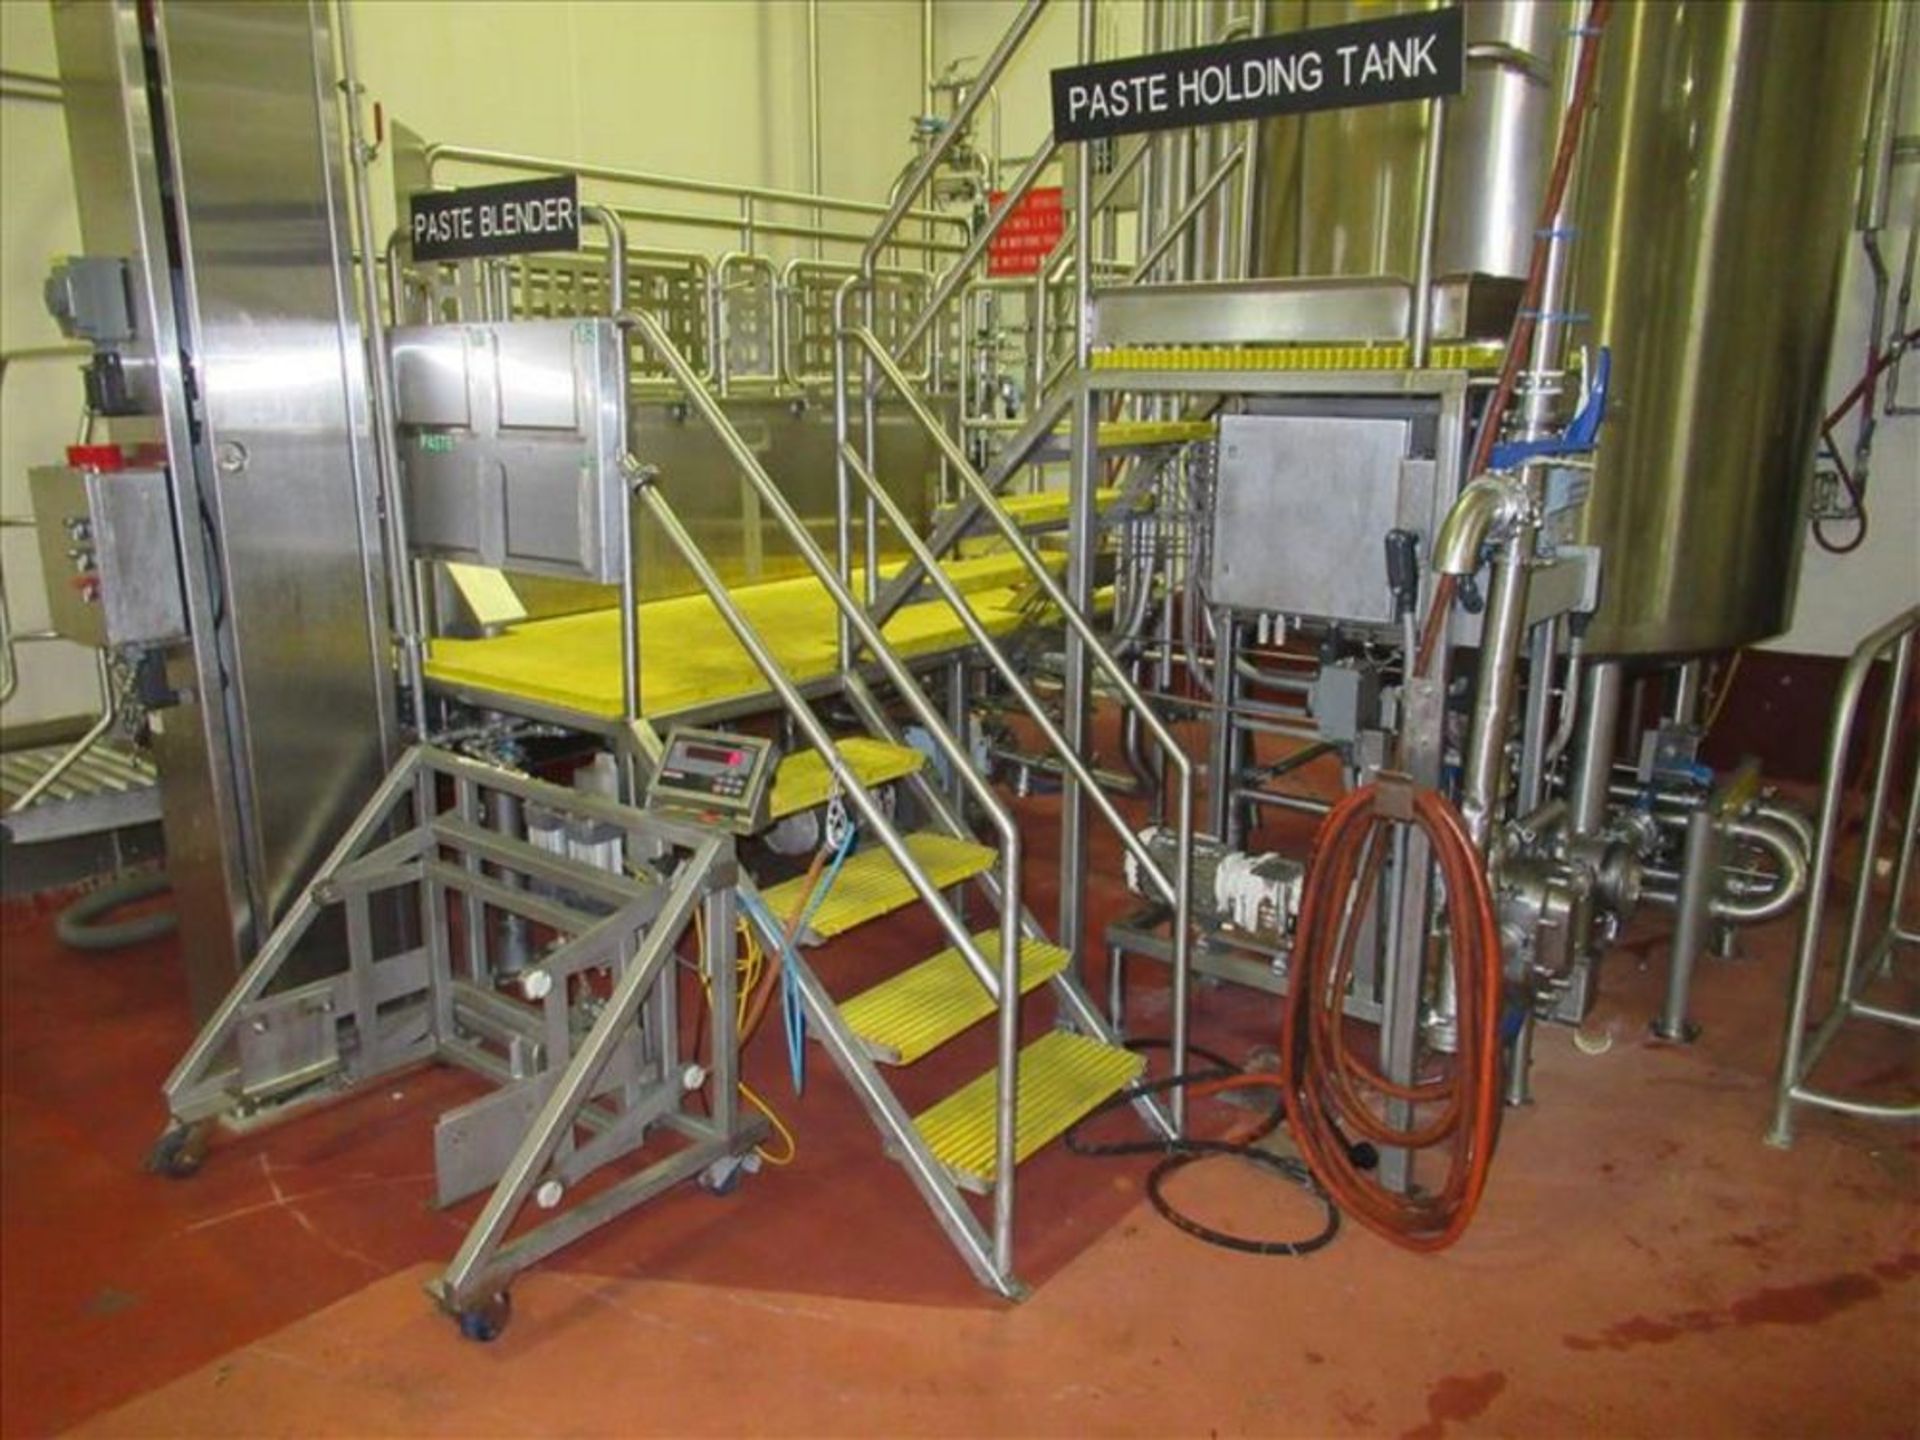 Paste blending work platform stainless framing and safety rail assembly with 4 and 3 steps work/